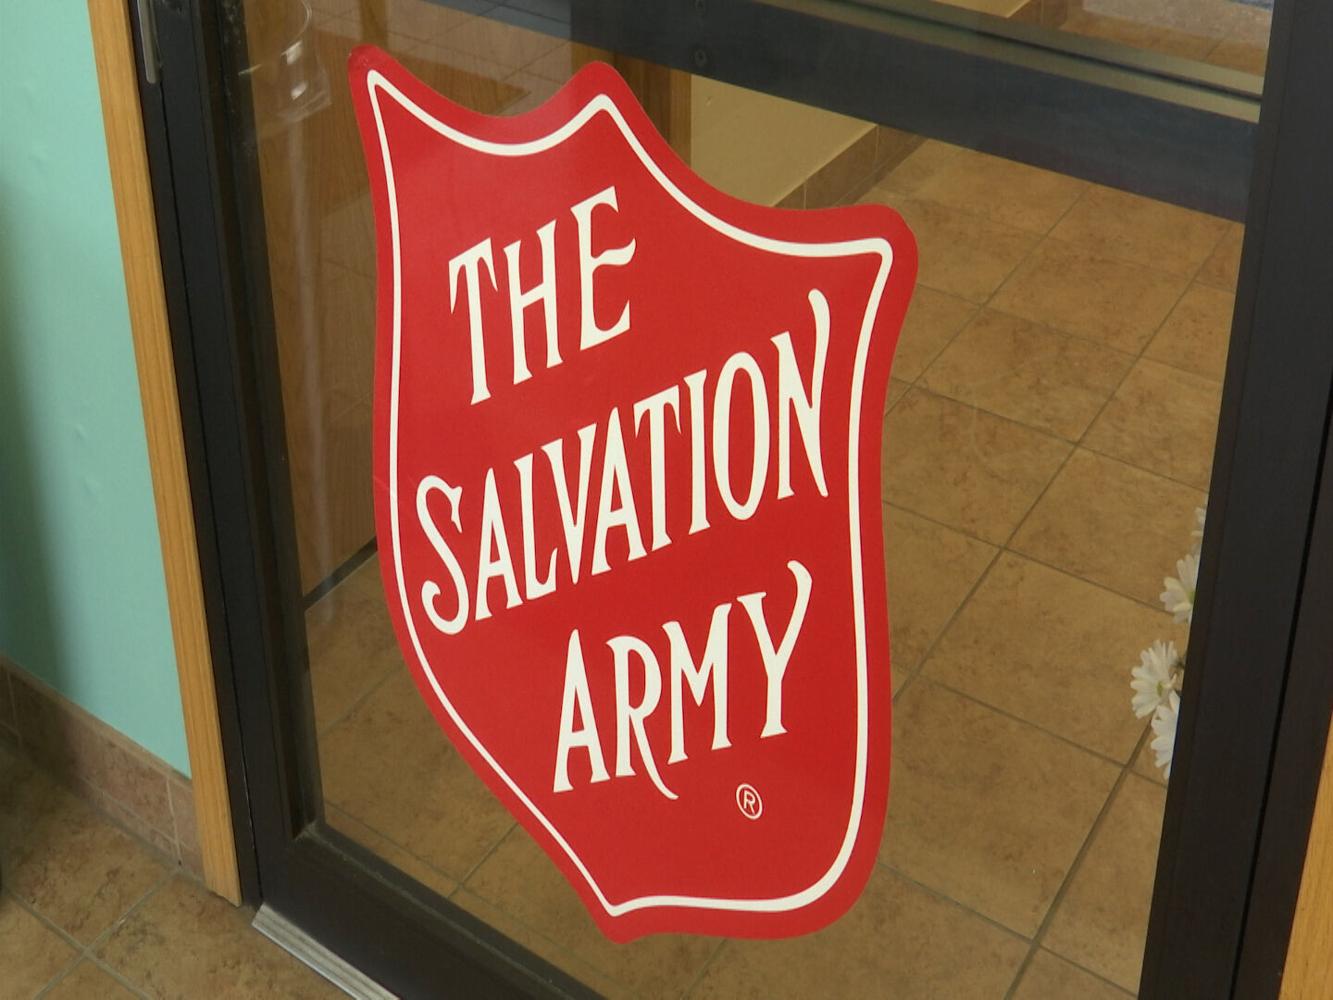 The Salvation Army Spokane offers utility assistance for those in need